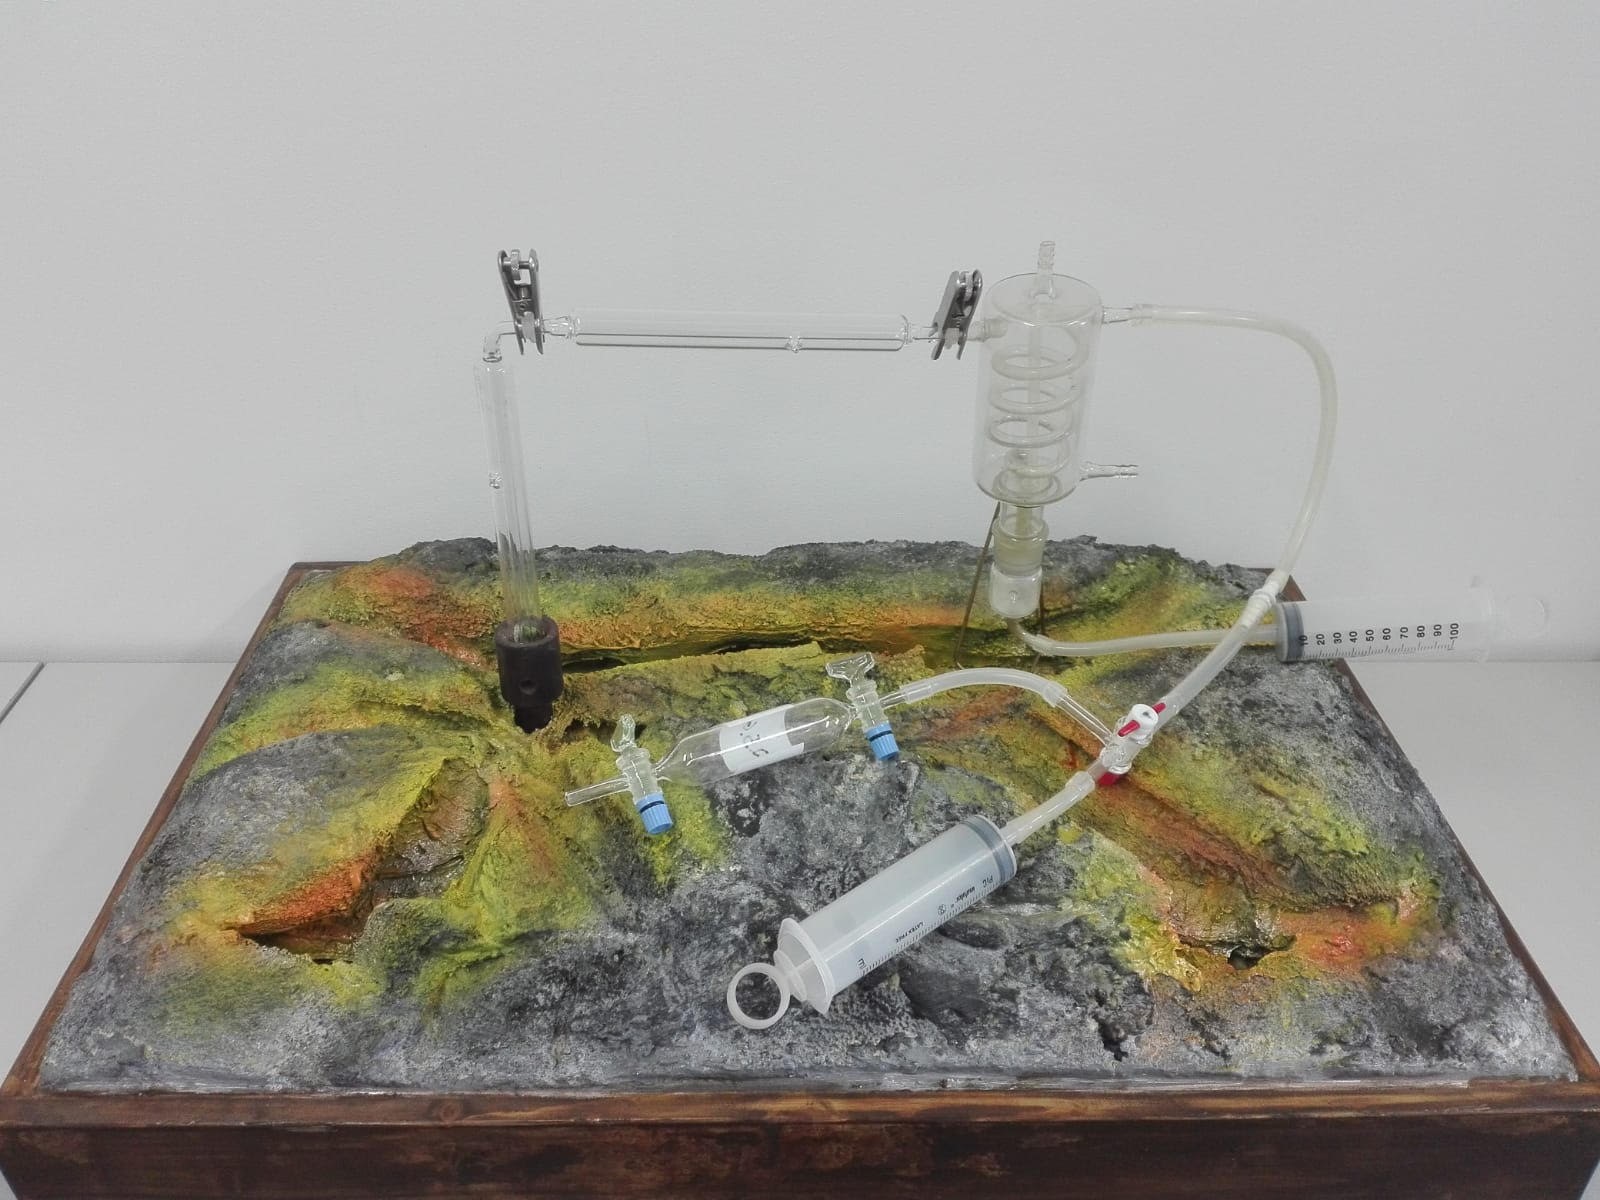 Diorama of a gas fumarole with sampling system